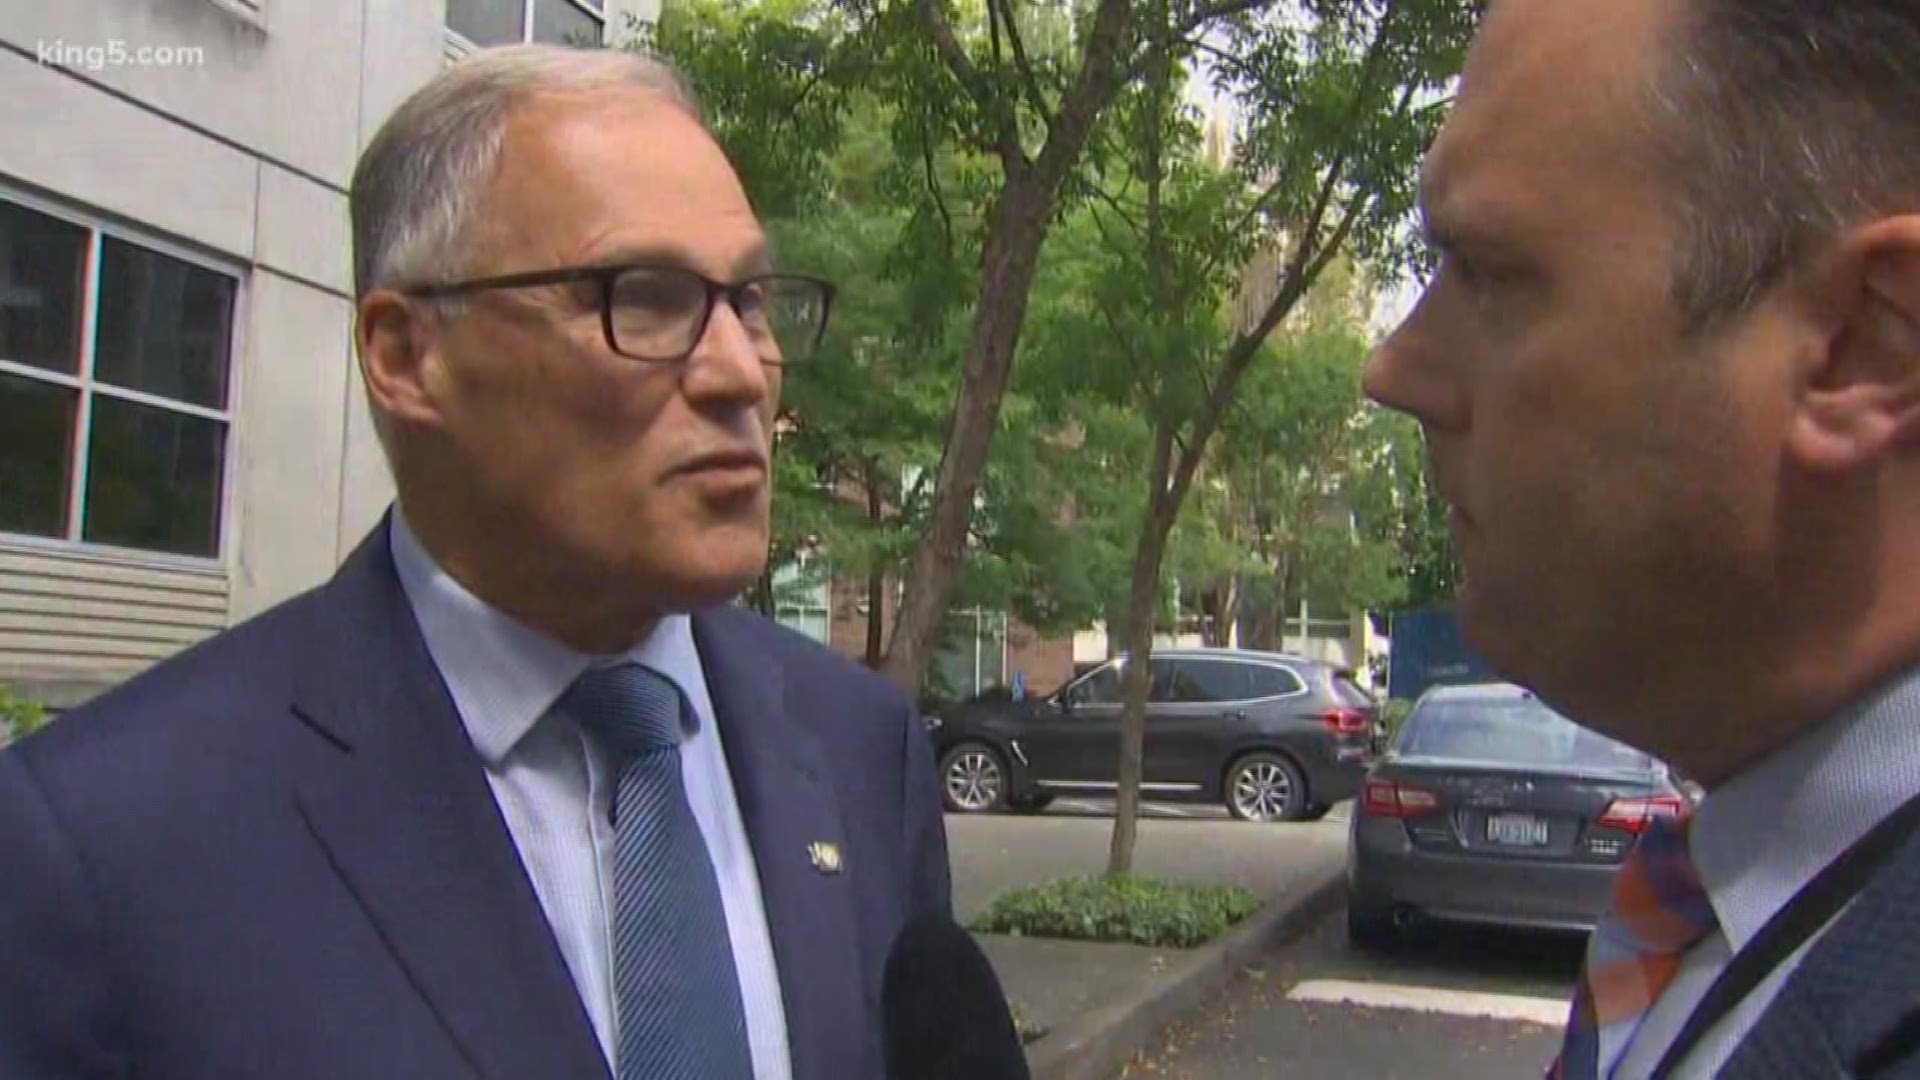 Gov. Jay Inslee announced that he will not be running for President of the United States, but instead, will run for re-election as Washington Governor. KING 5's Chris Daniels breaks down what that means for his opponents.